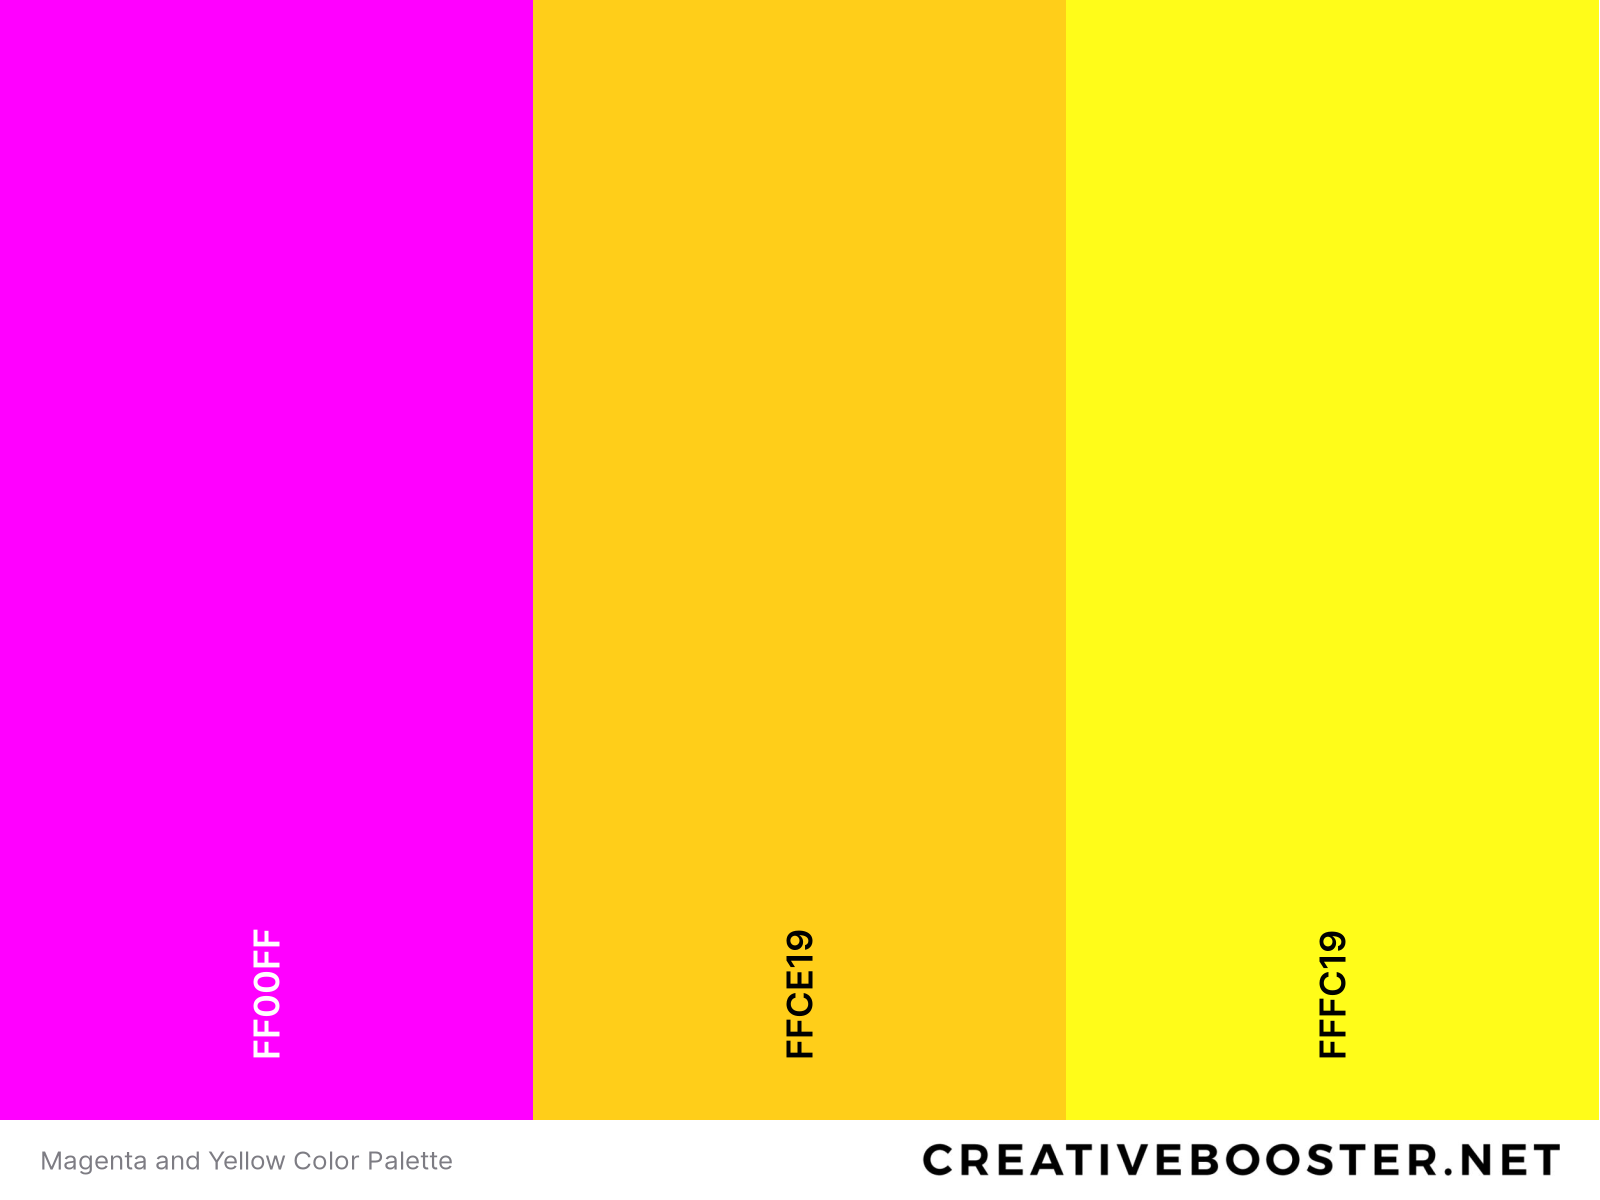 Magenta and Yellow Color Palette